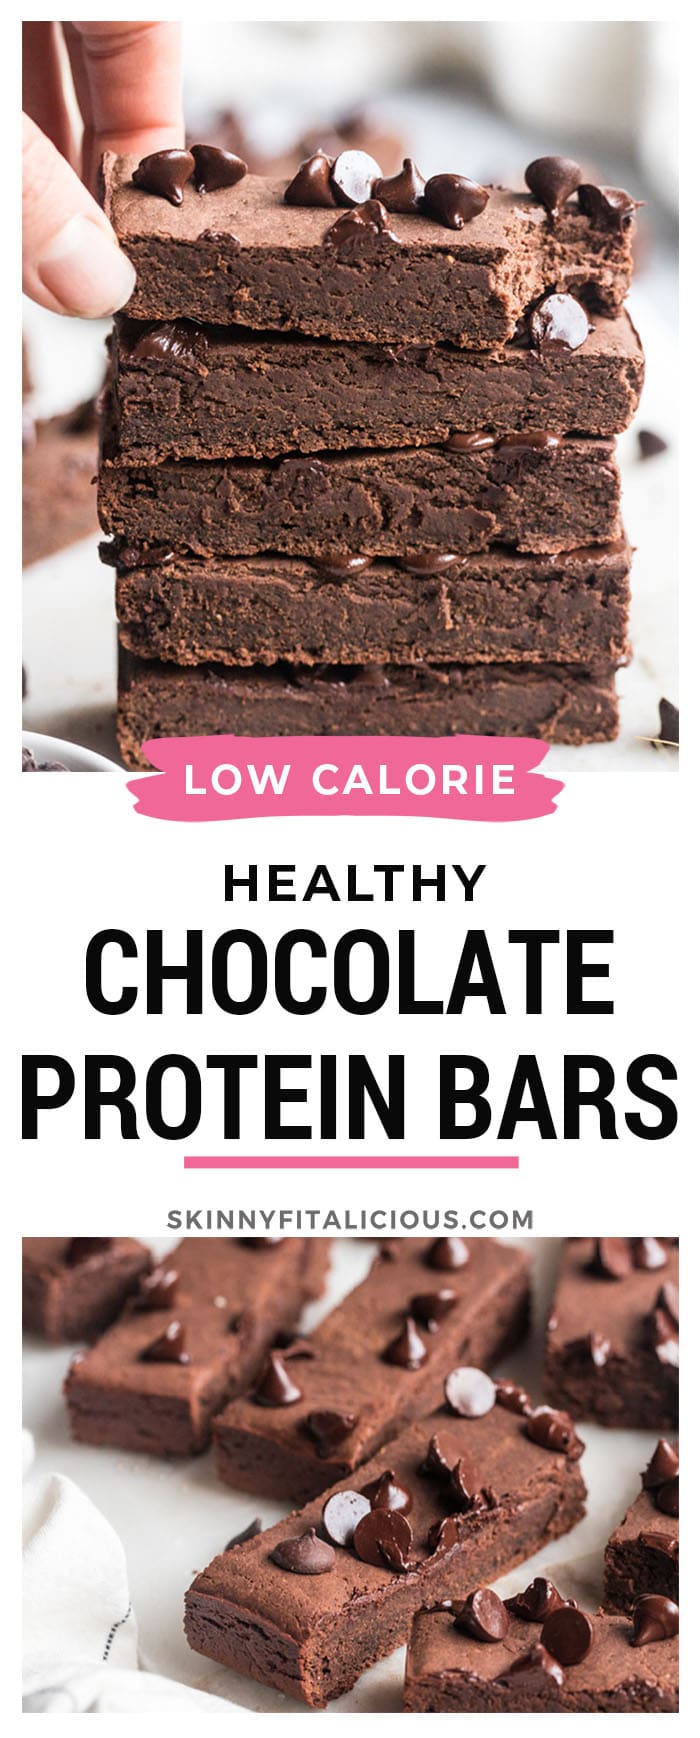 Healthy Chocolate Protein Bars are made with 6 real food ingredients and no added sugar. The perfect low calorie and gluten free protein snack that's simple to make and a treat even picky eaters will love!